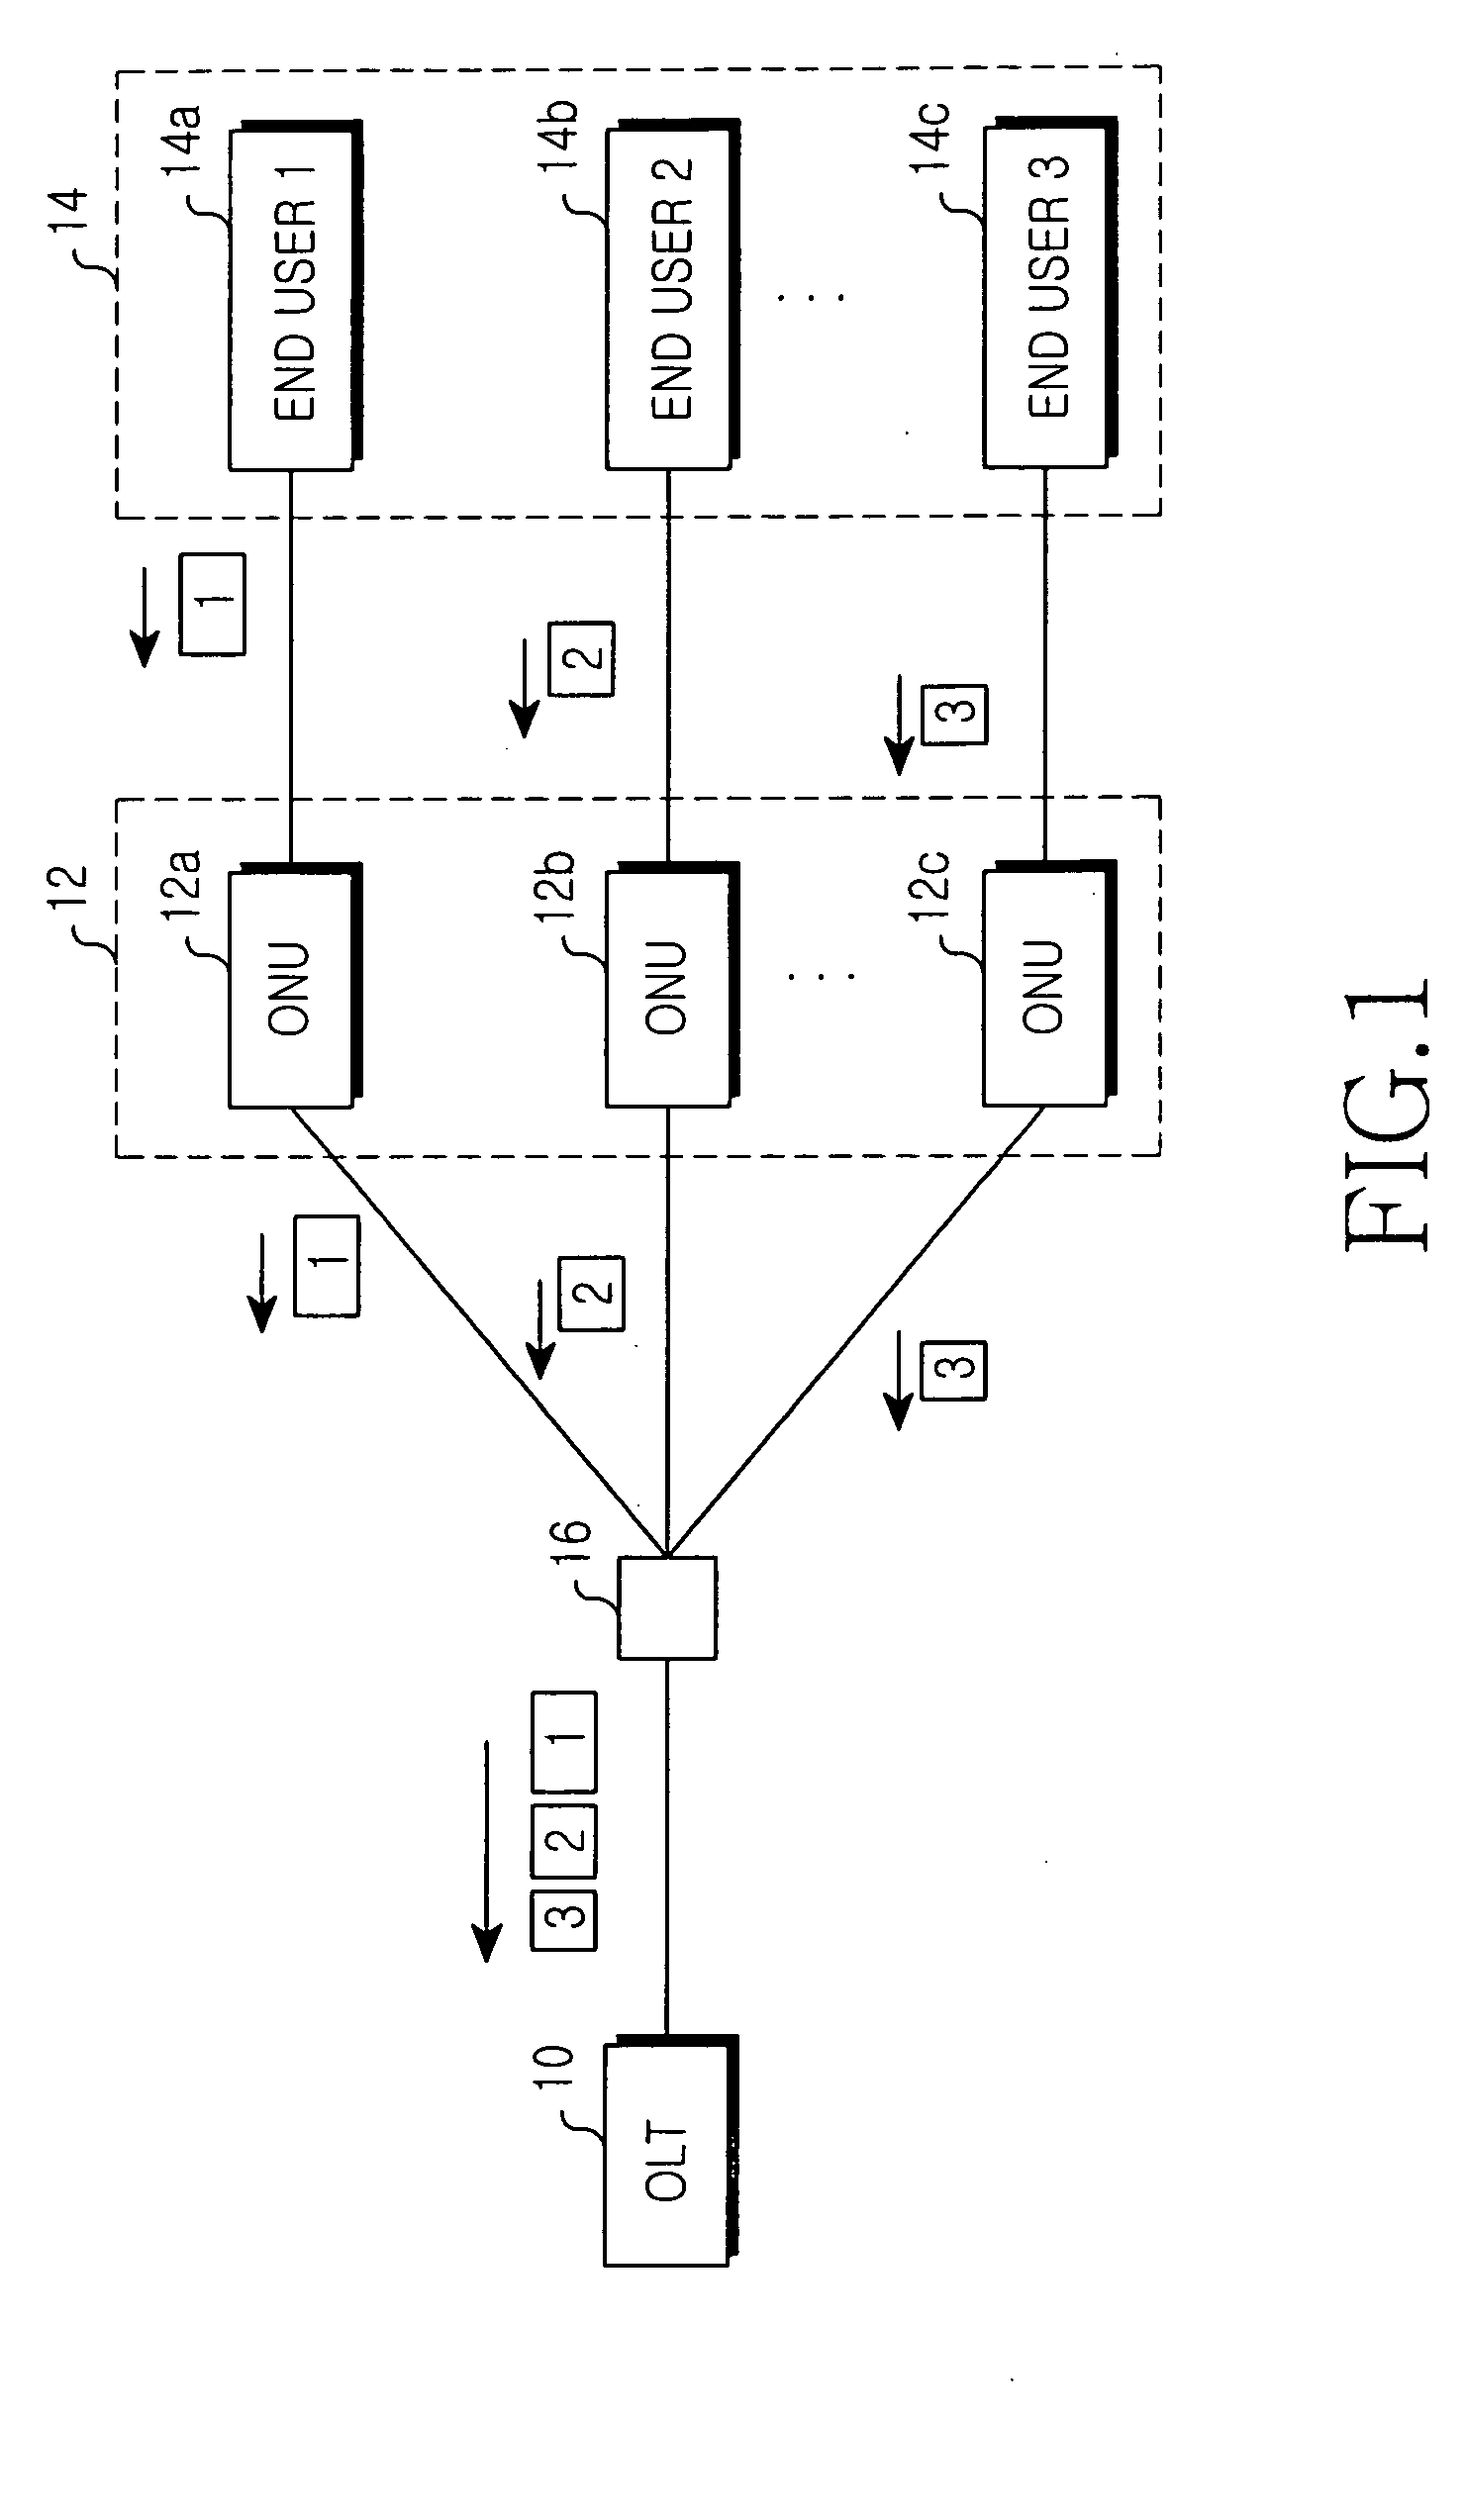 Apparatus and method for controlling upstream traffic for use in ethernet passive optical network